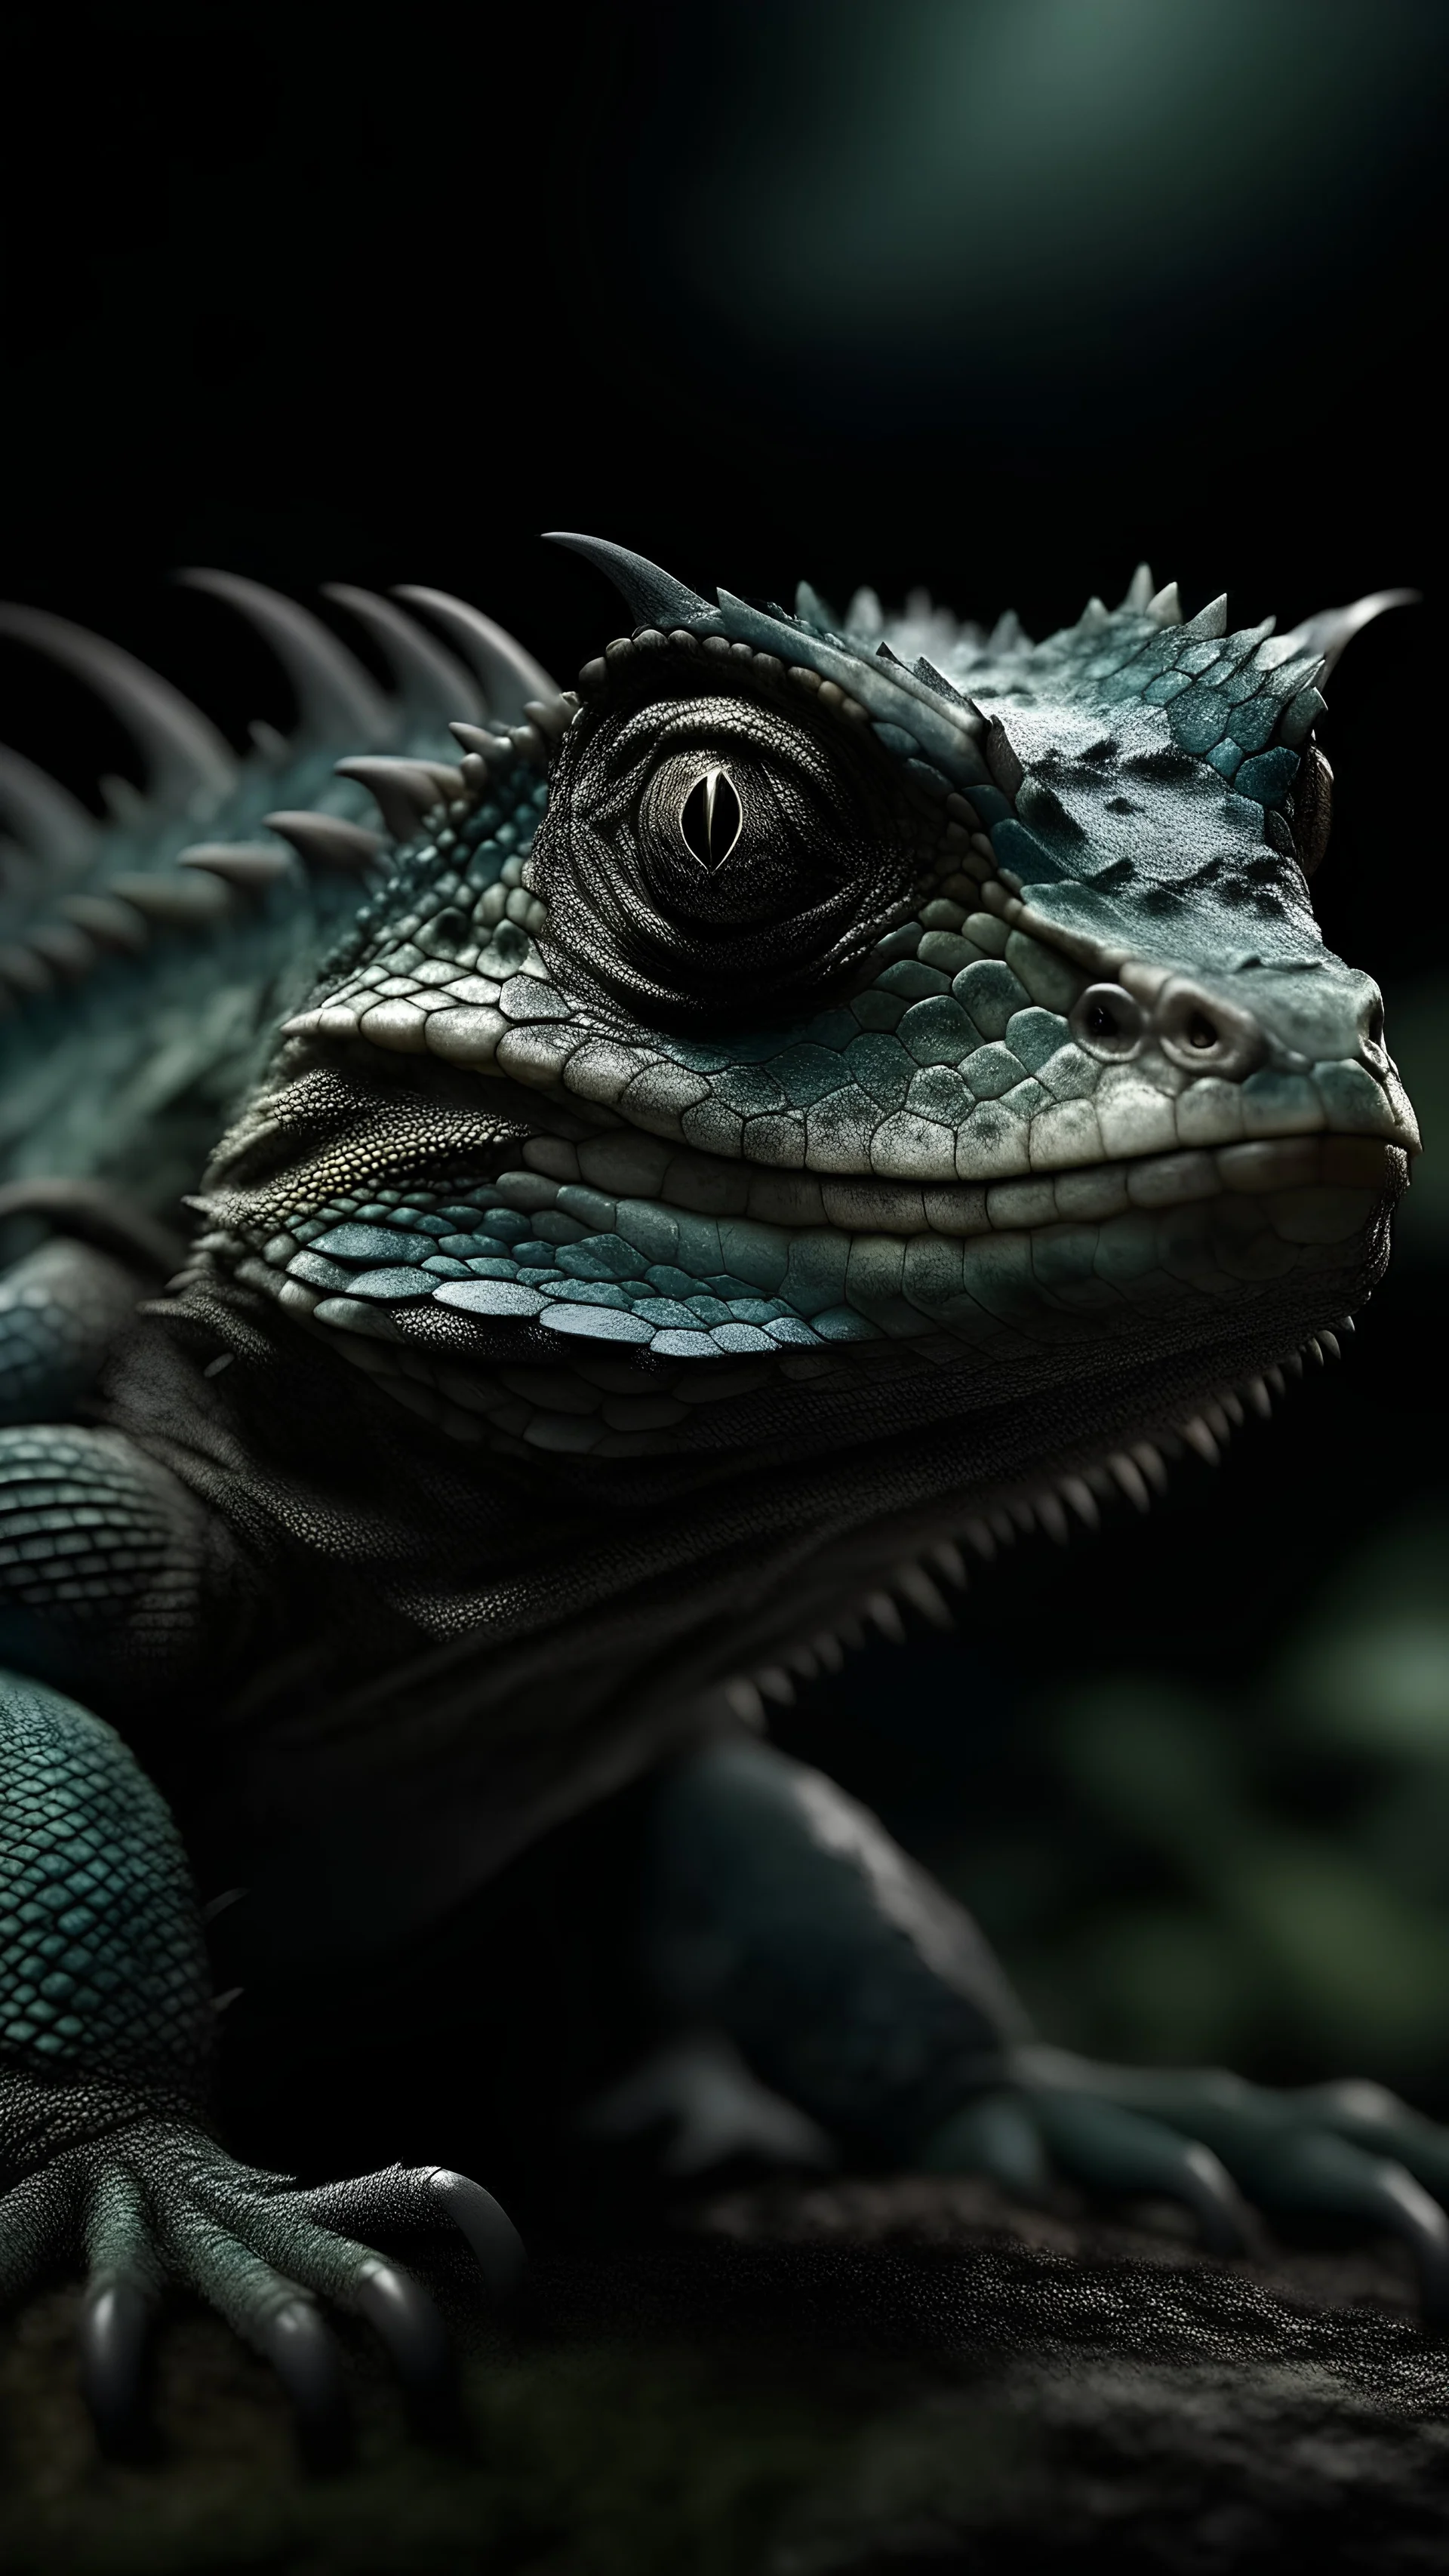 Create a hyperrealistic photograph of a lizard-like creature in an unfamiliar world. Emphasize the creature’s sharp features, making them stand out prominently. Infuse the scene with an unsettling atmosphere, evoking a sense of discomfort.